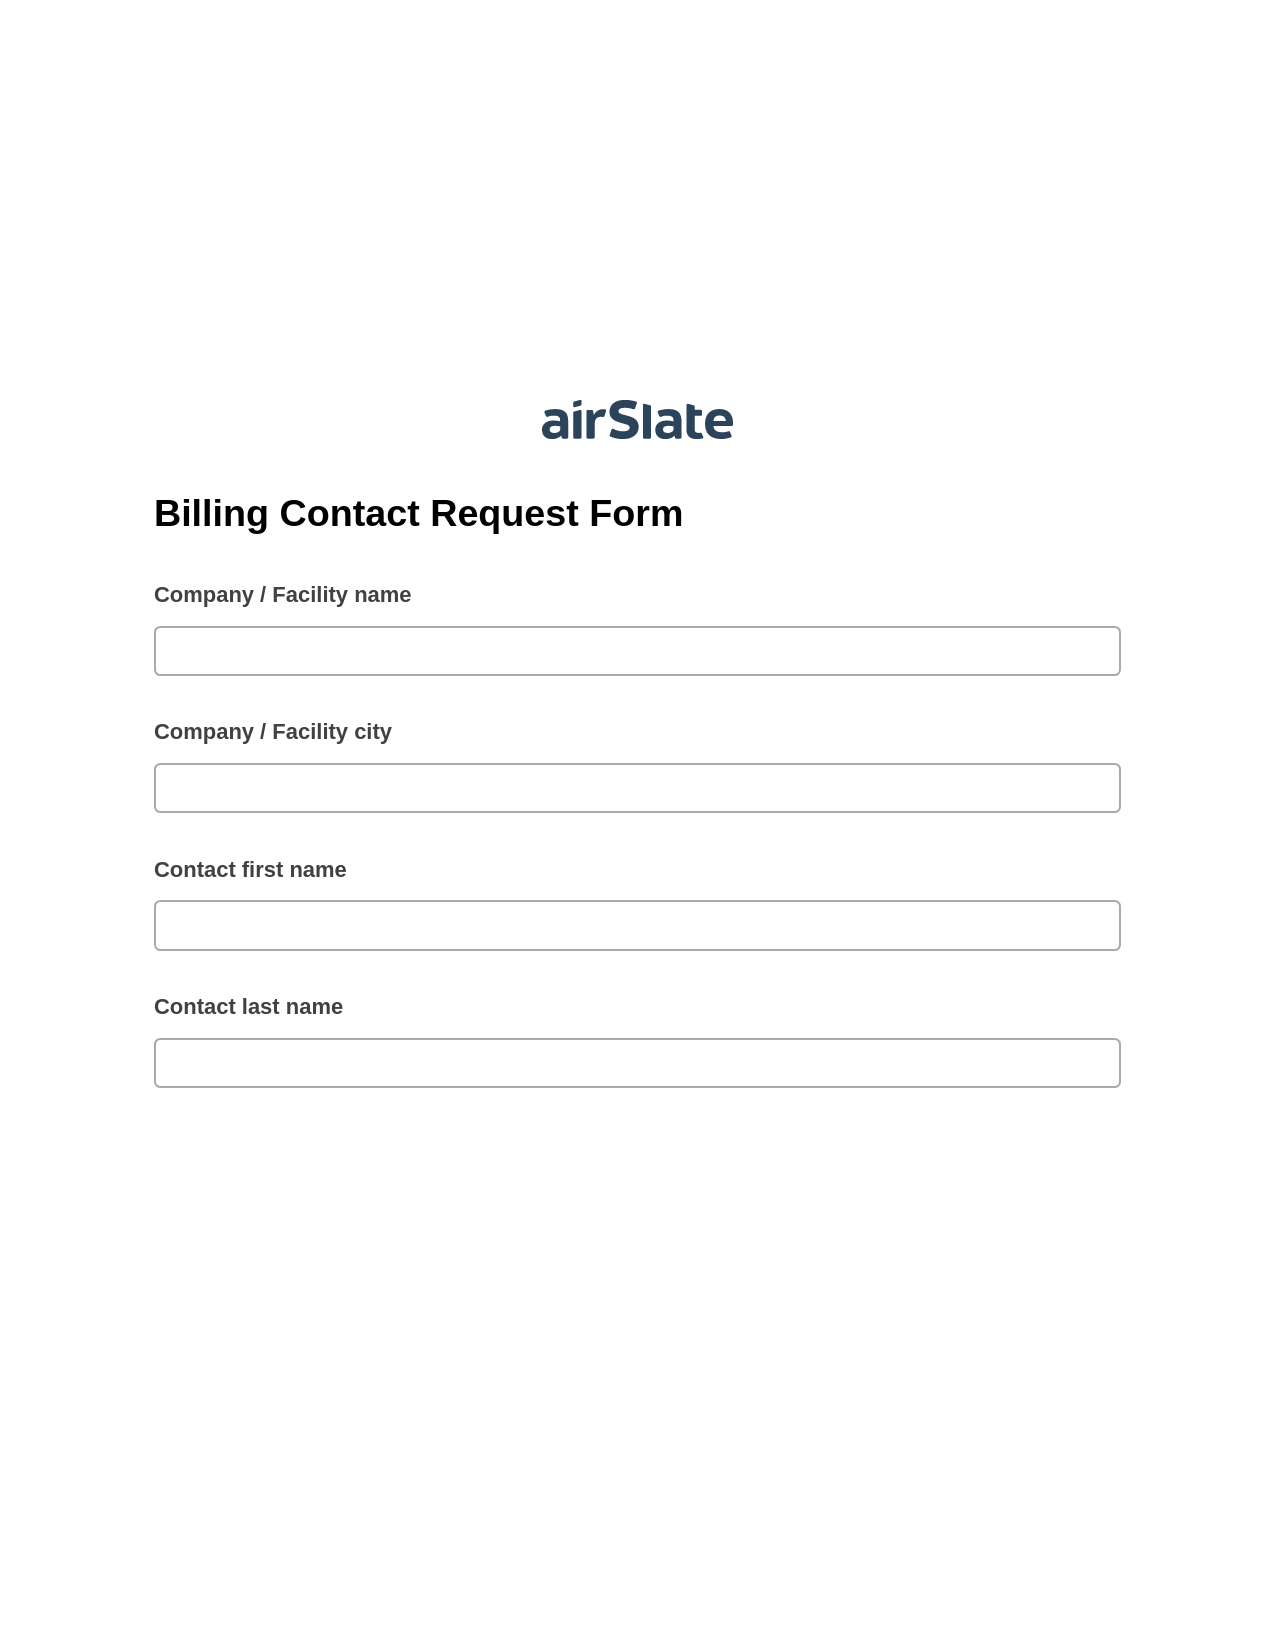 Multirole Billing Contact Request Form Pre-fill Dropdowns from CSV File Bot, Create MS Dynamics 365 Records Bot, Export to MySQL Bot